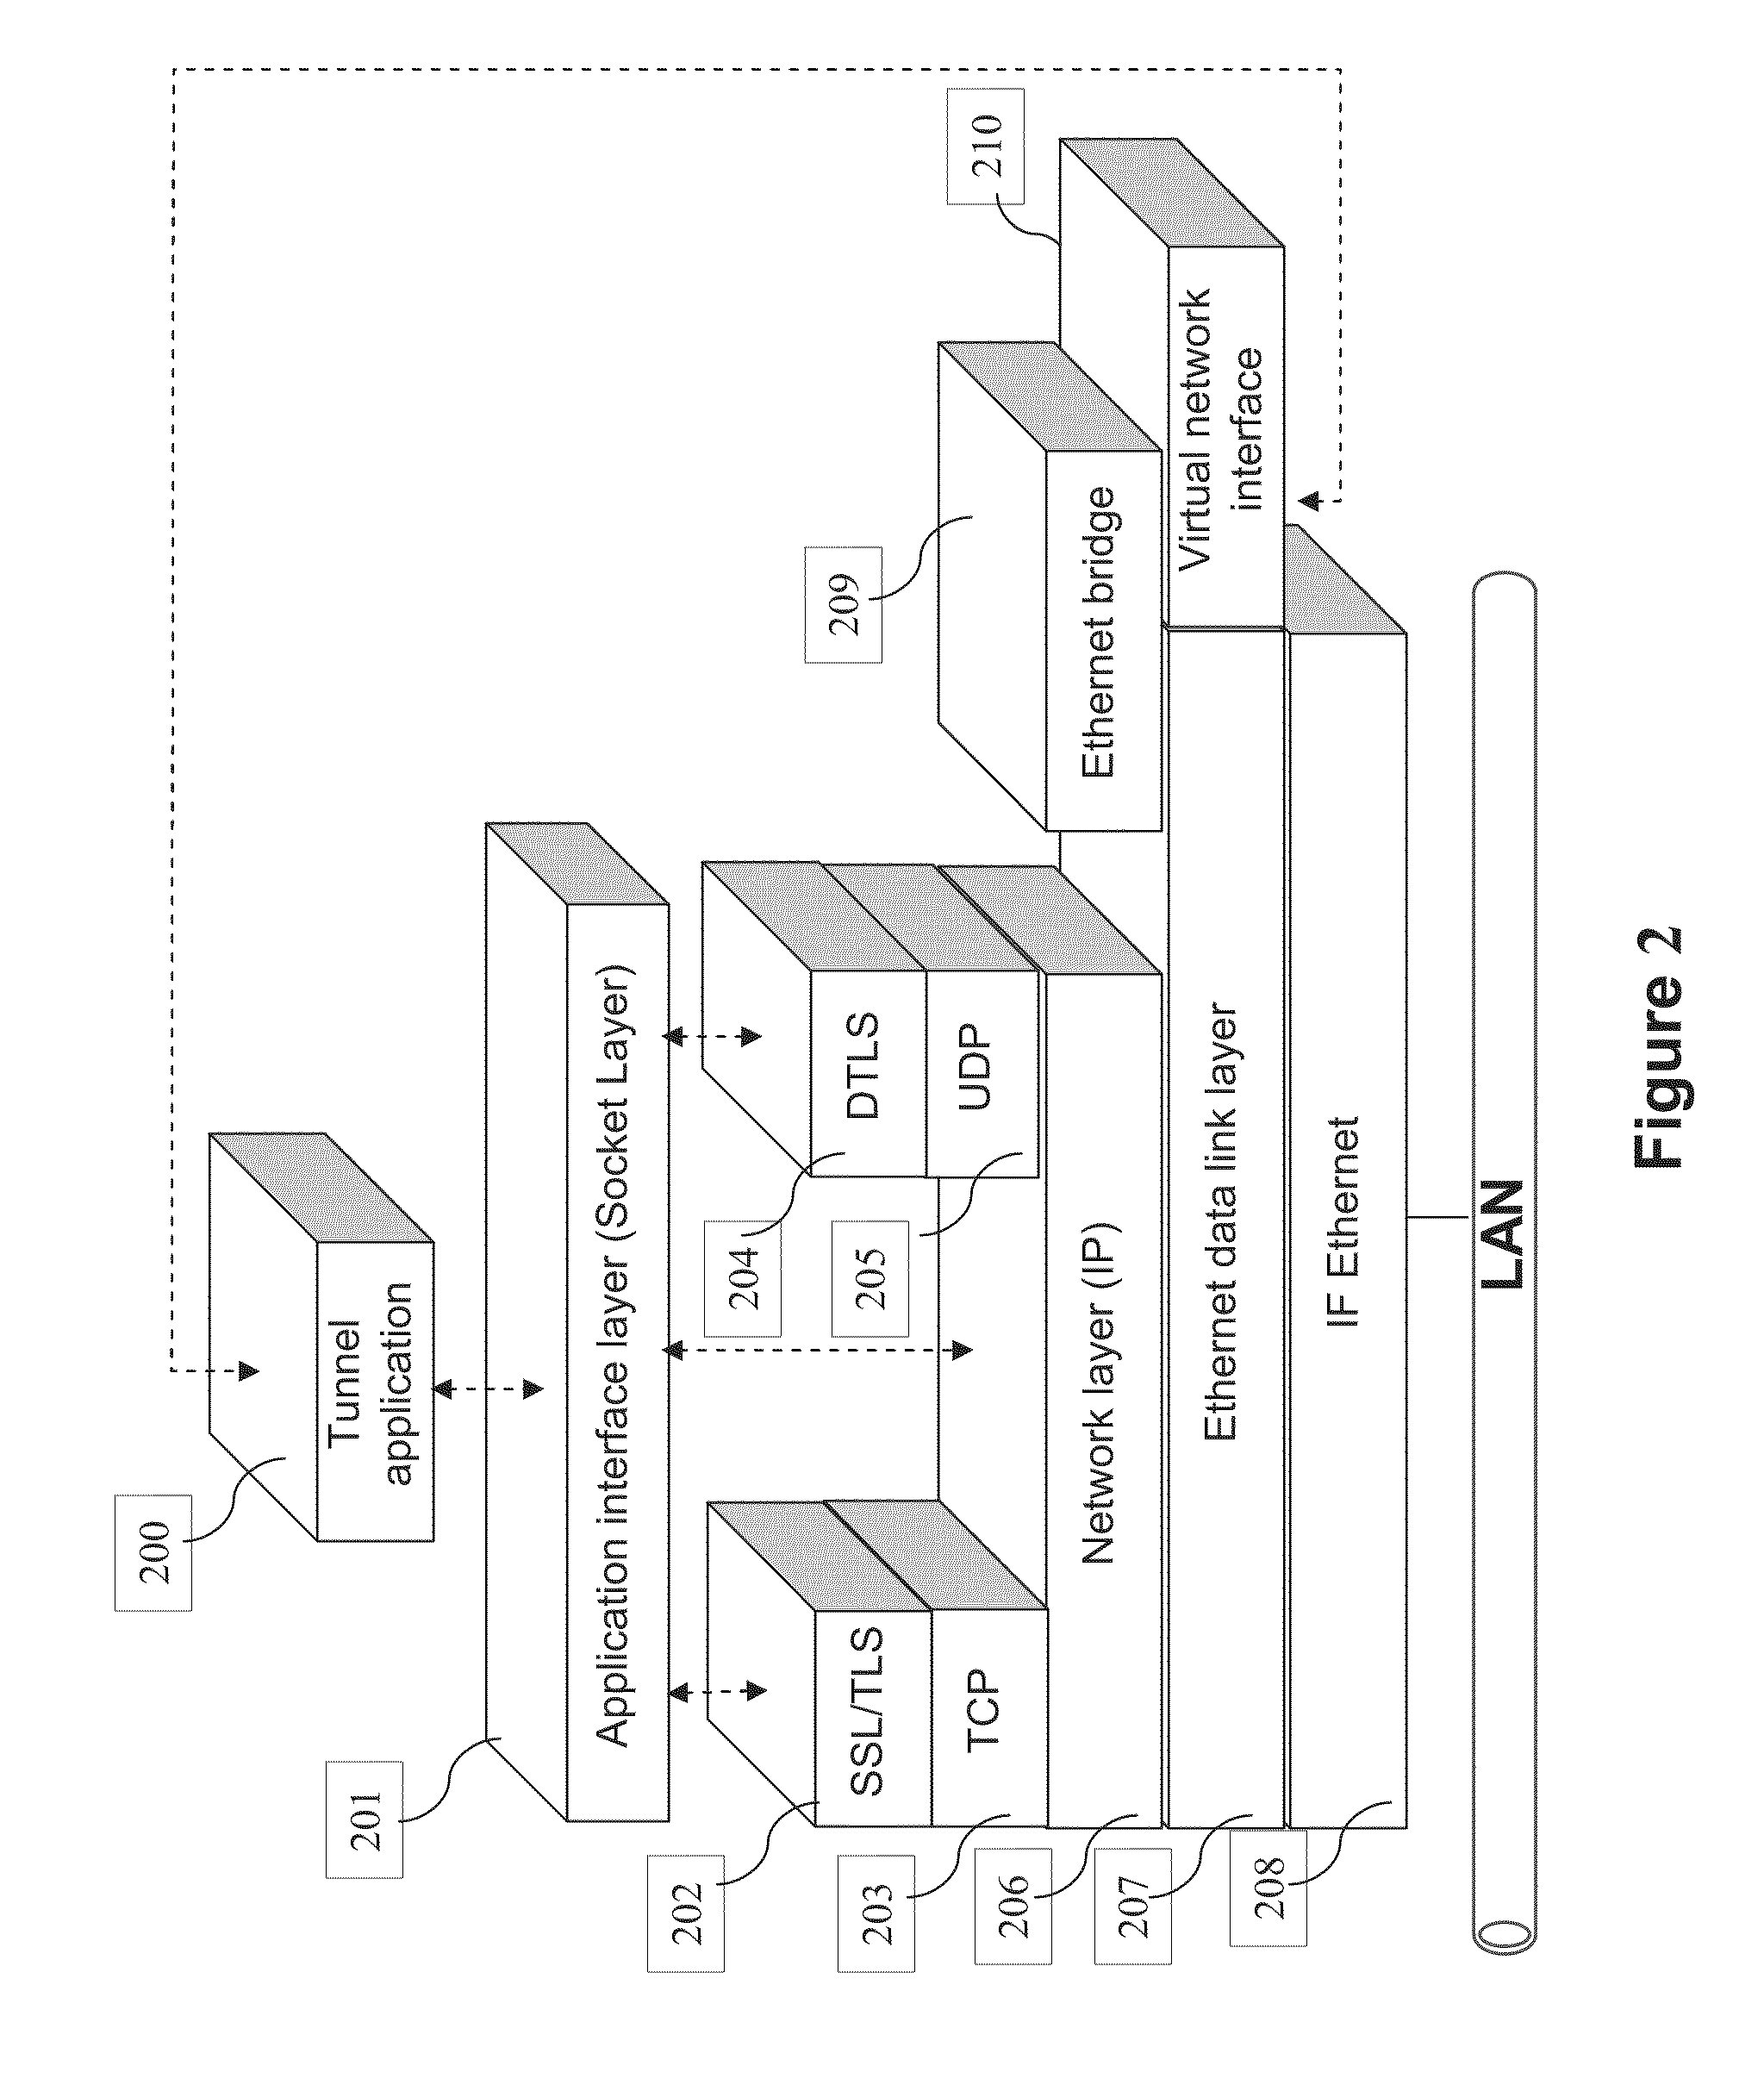 Methods and devices for transmitting a data stream and corresponding computer readable media